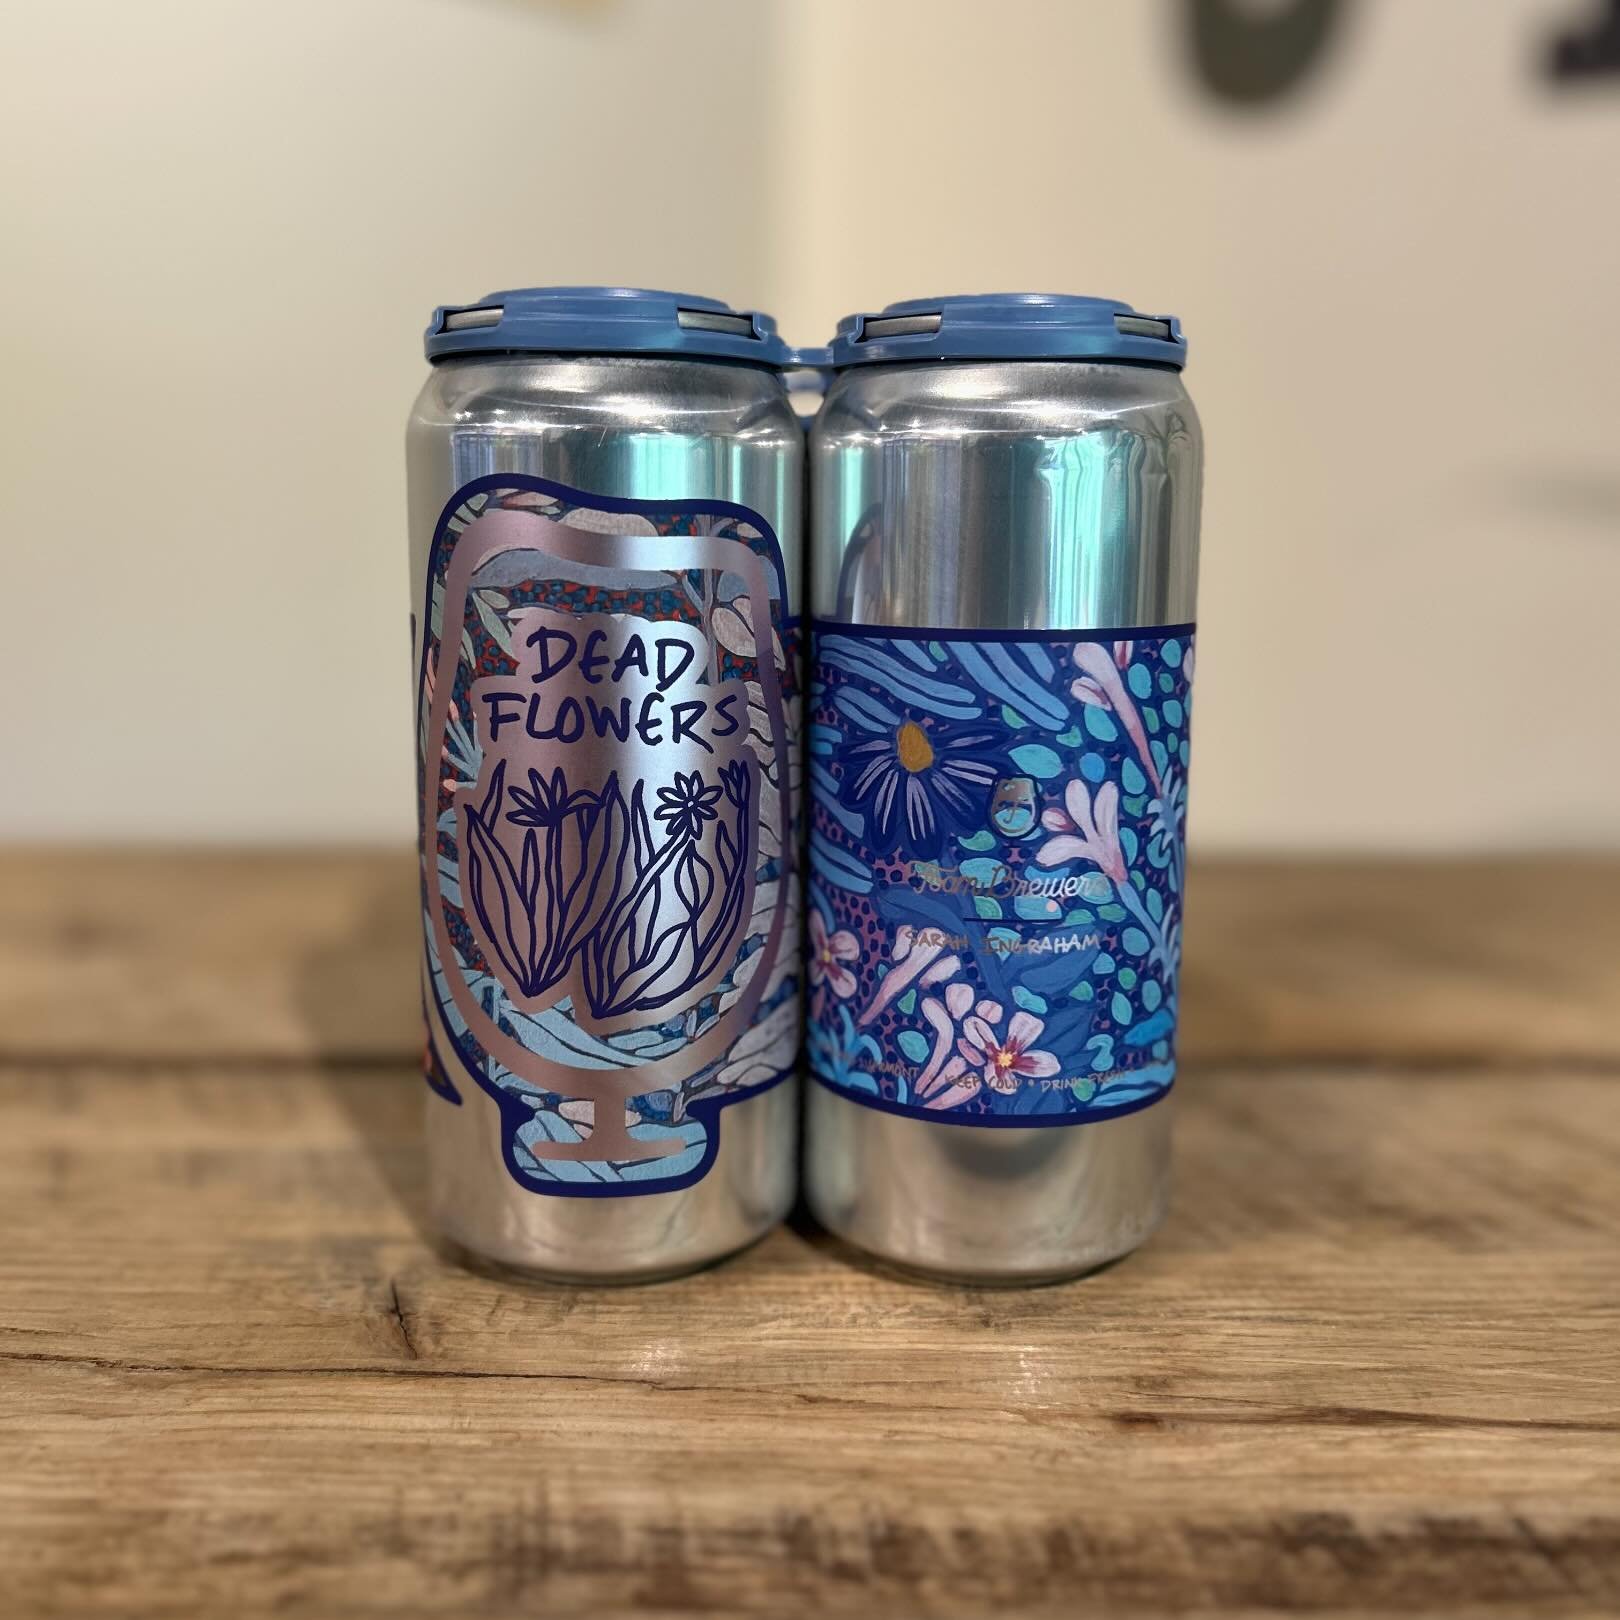 @foambrewers is back in the shop this week #NowAvailable #SudburyCraftBeer #SudburyMA
&mdash;
Dead Flowers - 6.2% IPA dry-hopped with Riwaka and Southern Cross. Notes of fresh melon, tropical fruit juice, a hint of lime and creamsicle. Art by @sarahi